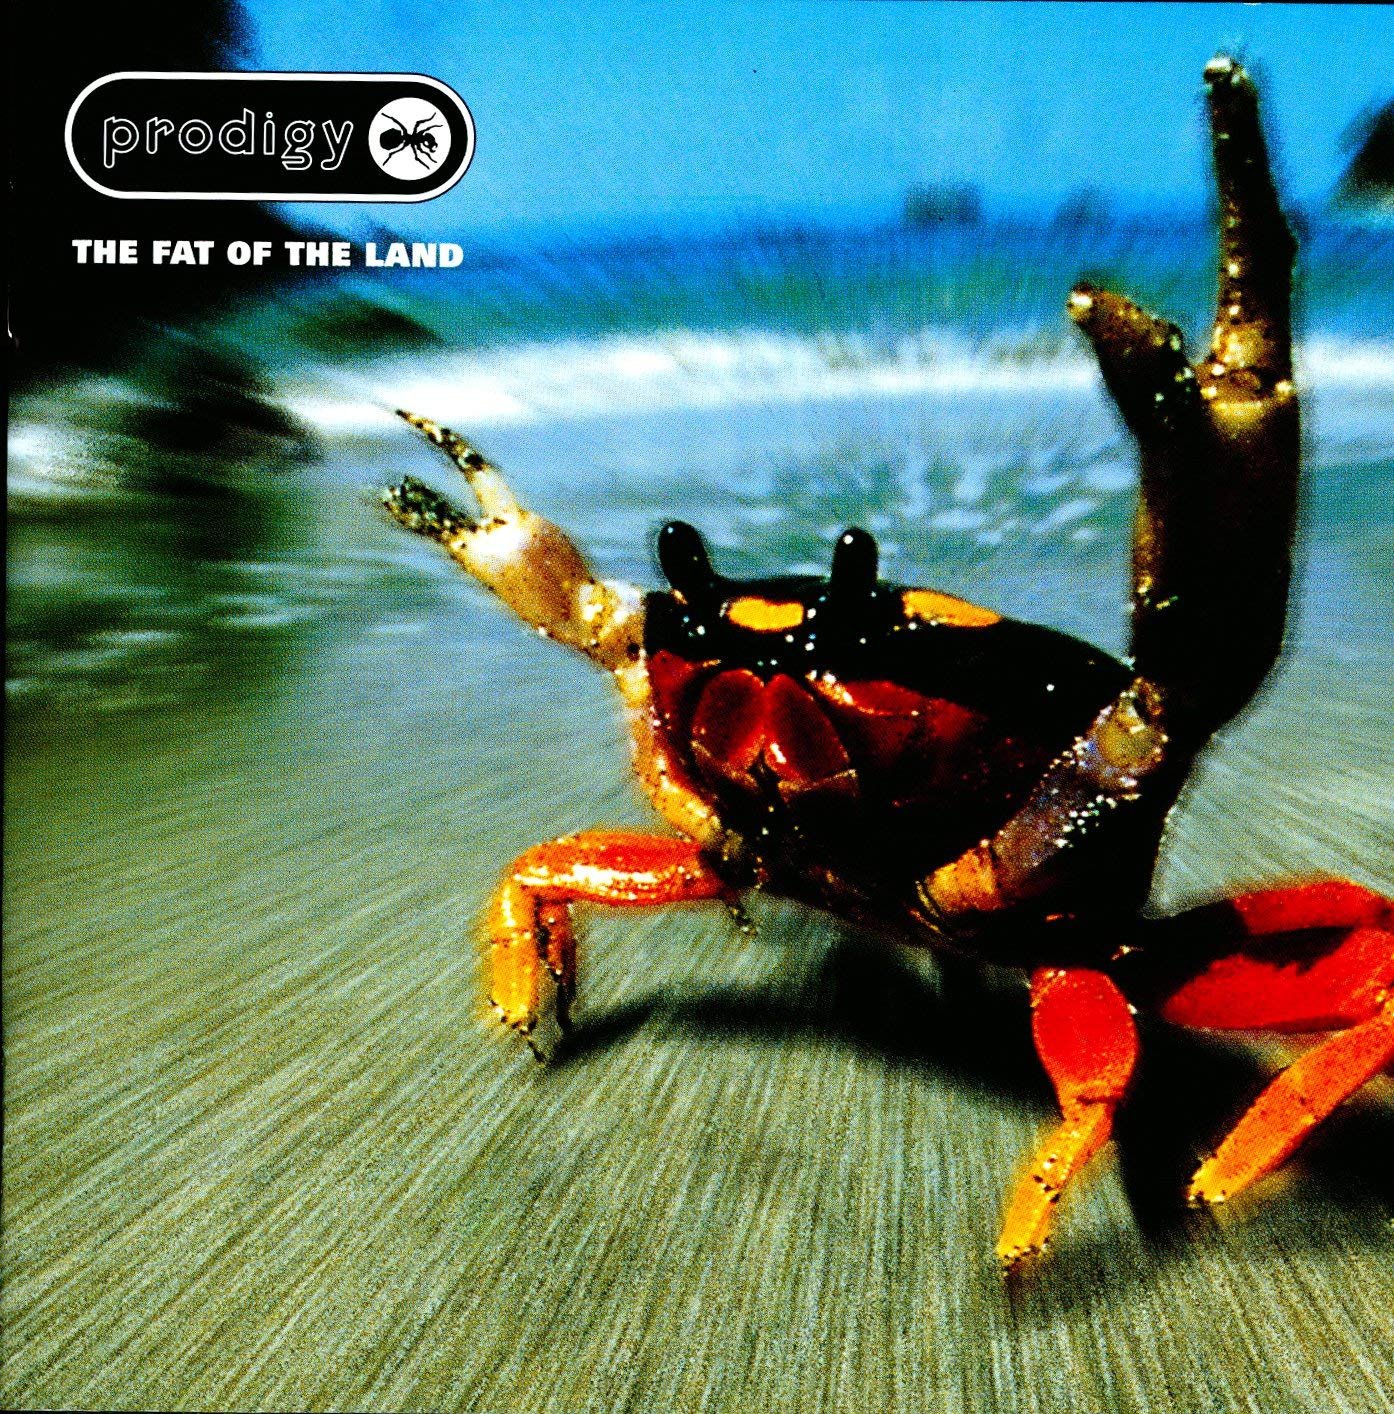 A SCENE IN RETROSPECT: The Prodigy – “The Fat of the Land”